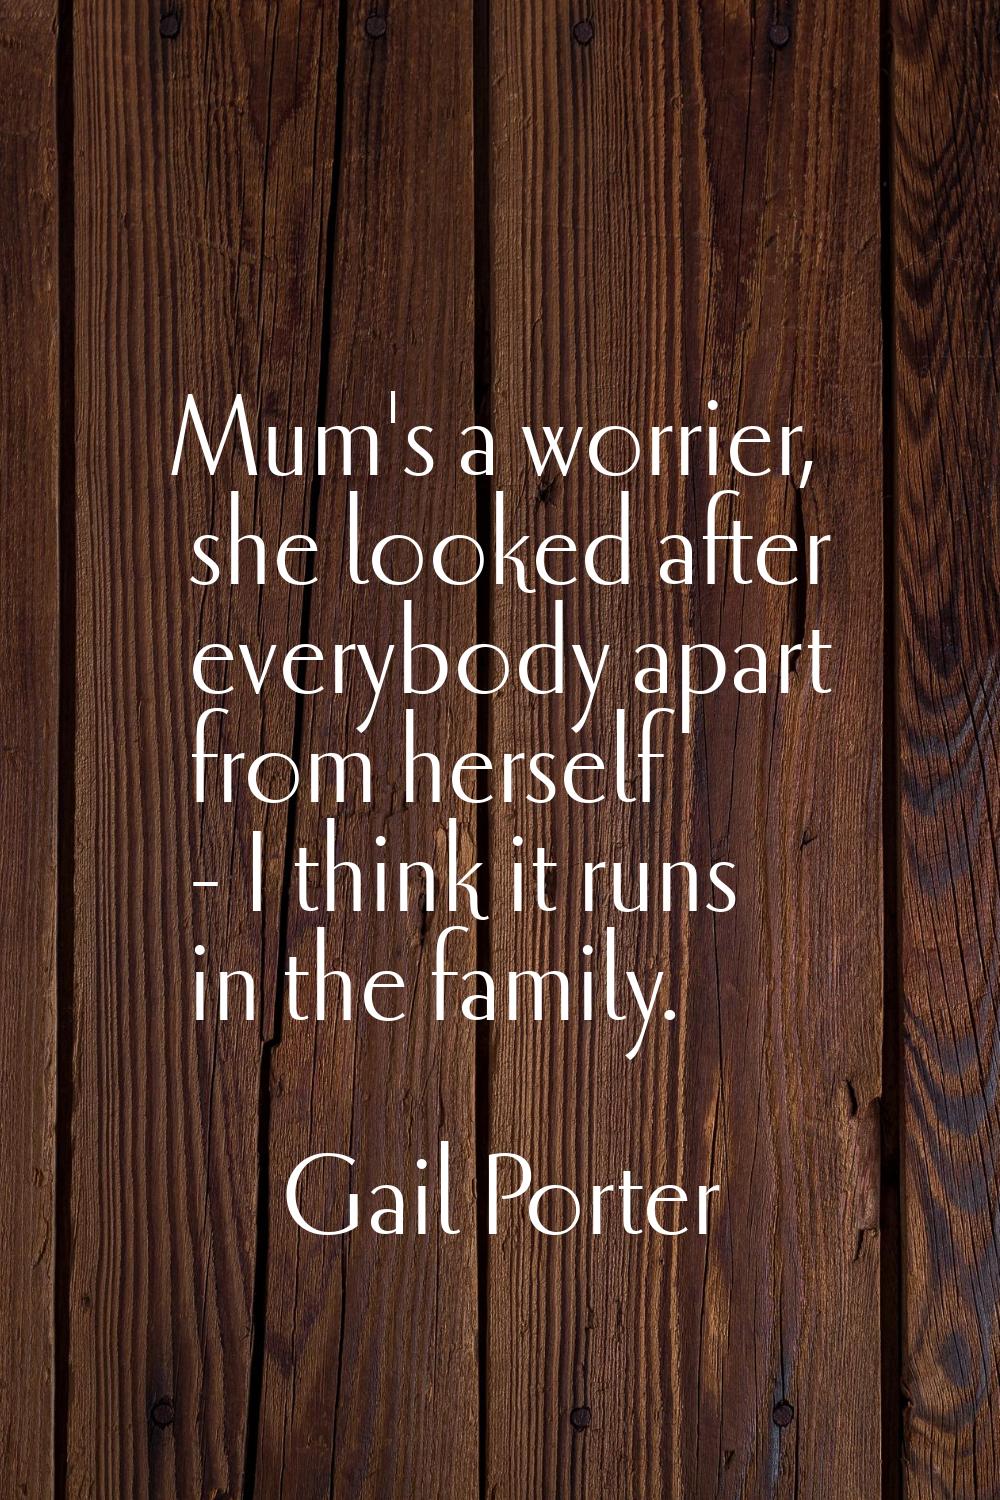 Mum's a worrier, she looked after everybody apart from herself - I think it runs in the family.